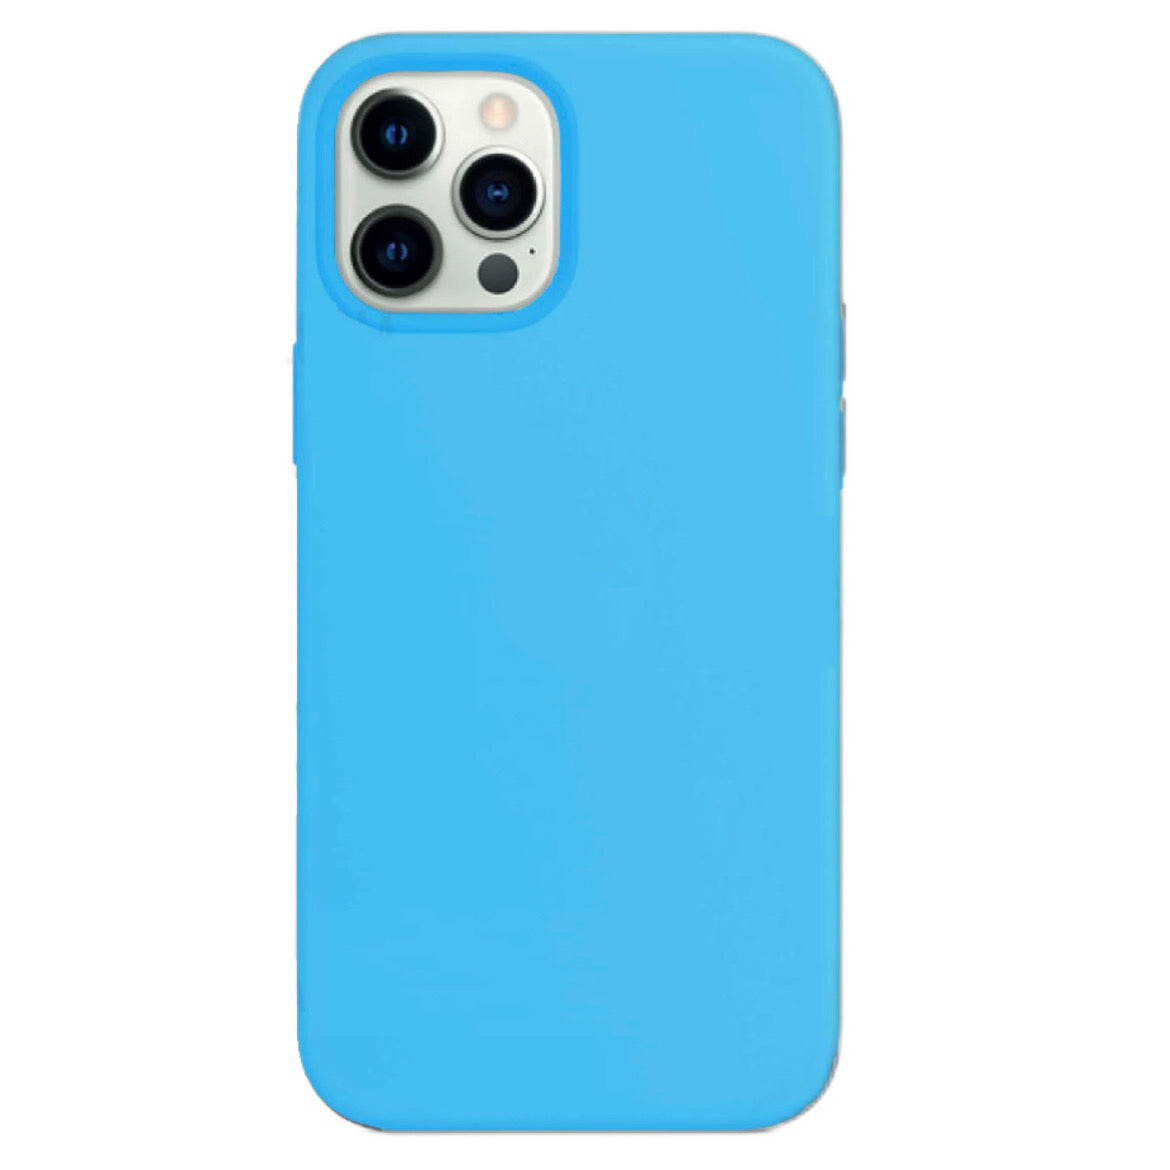 Cases For iPhone 12 Pro saynama